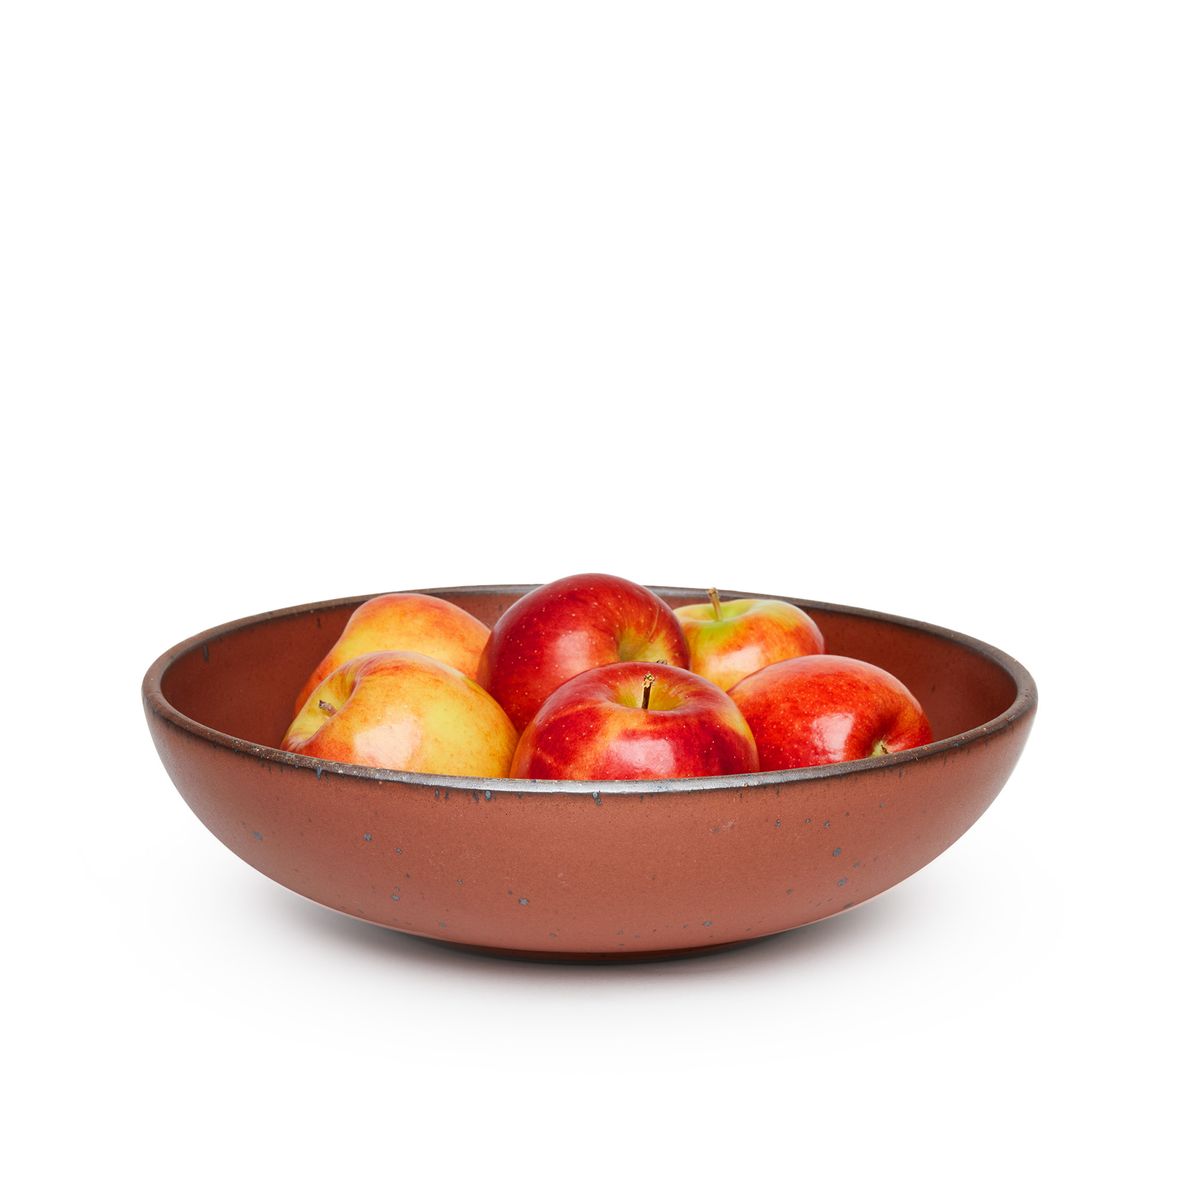 amaro Weeknight Serving Bowl with apples